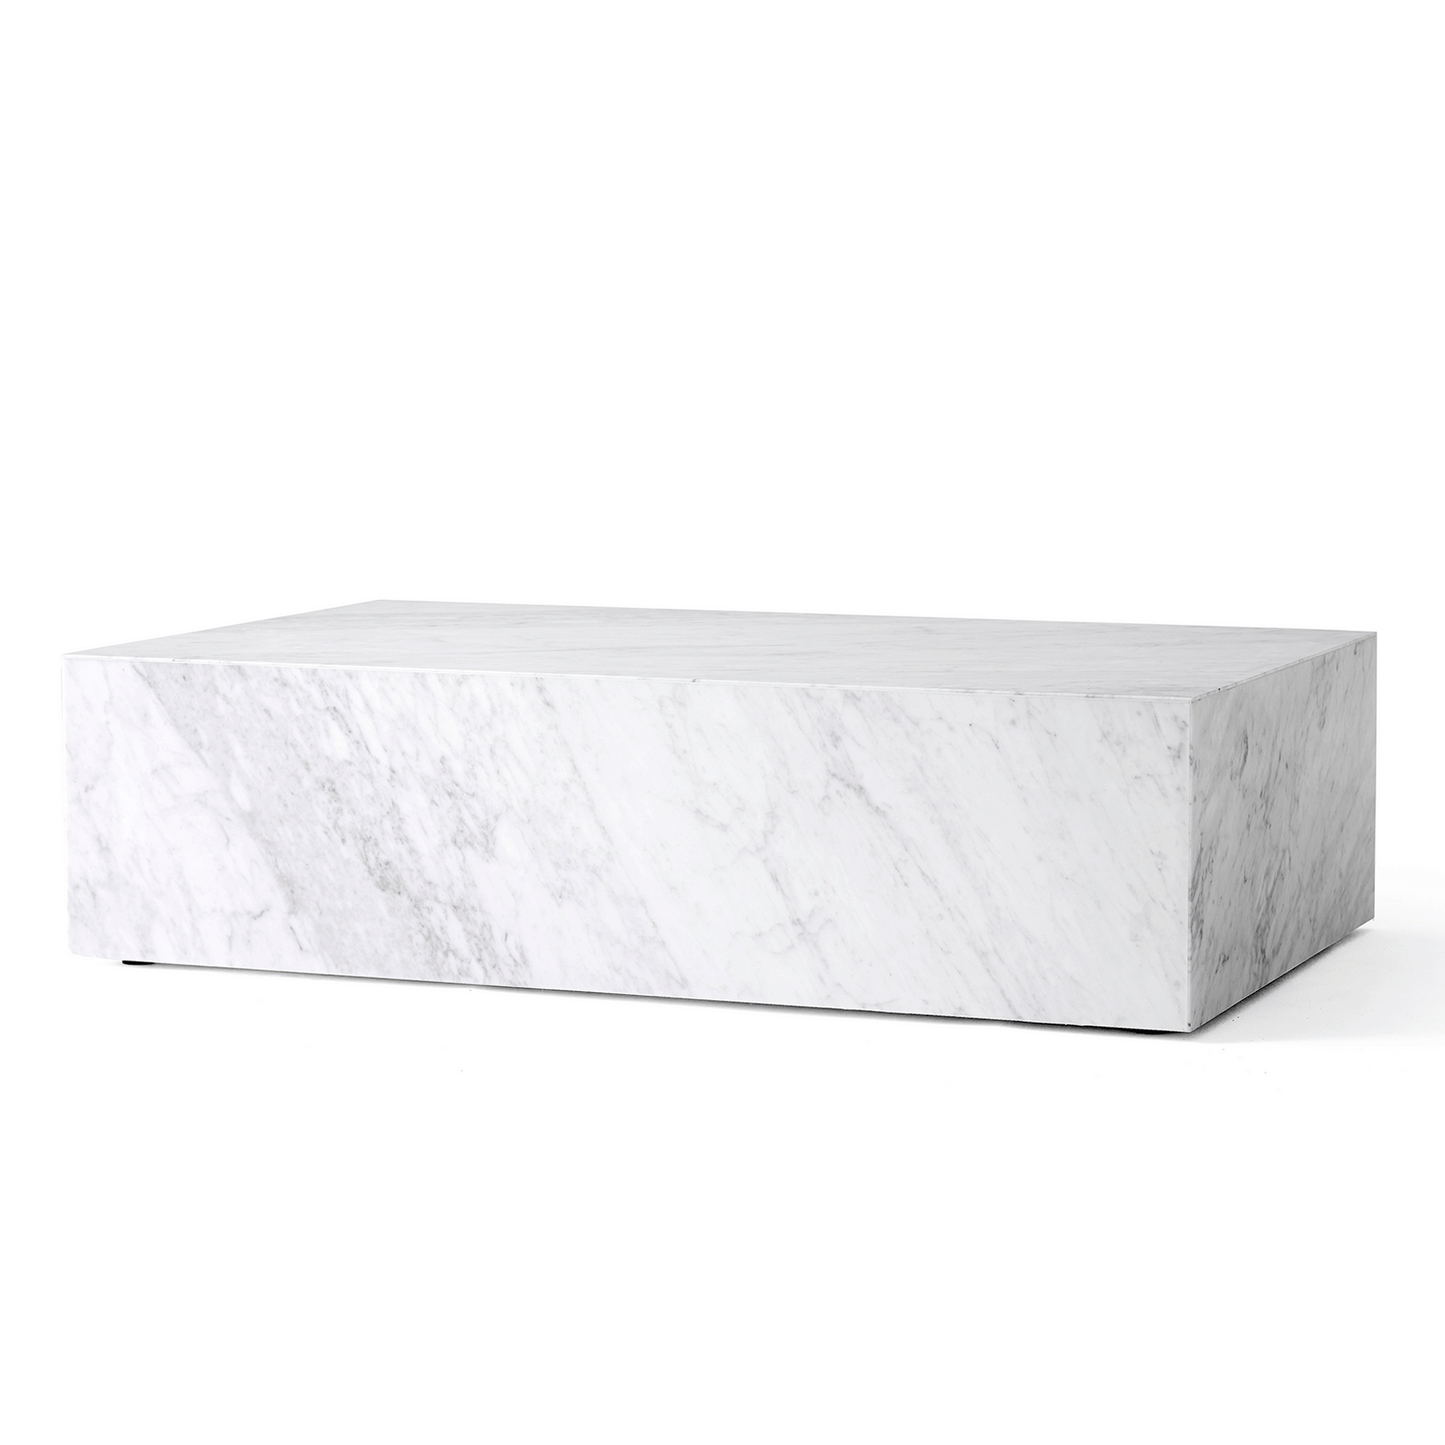 Plinth Coffee Table Low by Audo #Carrara Marble